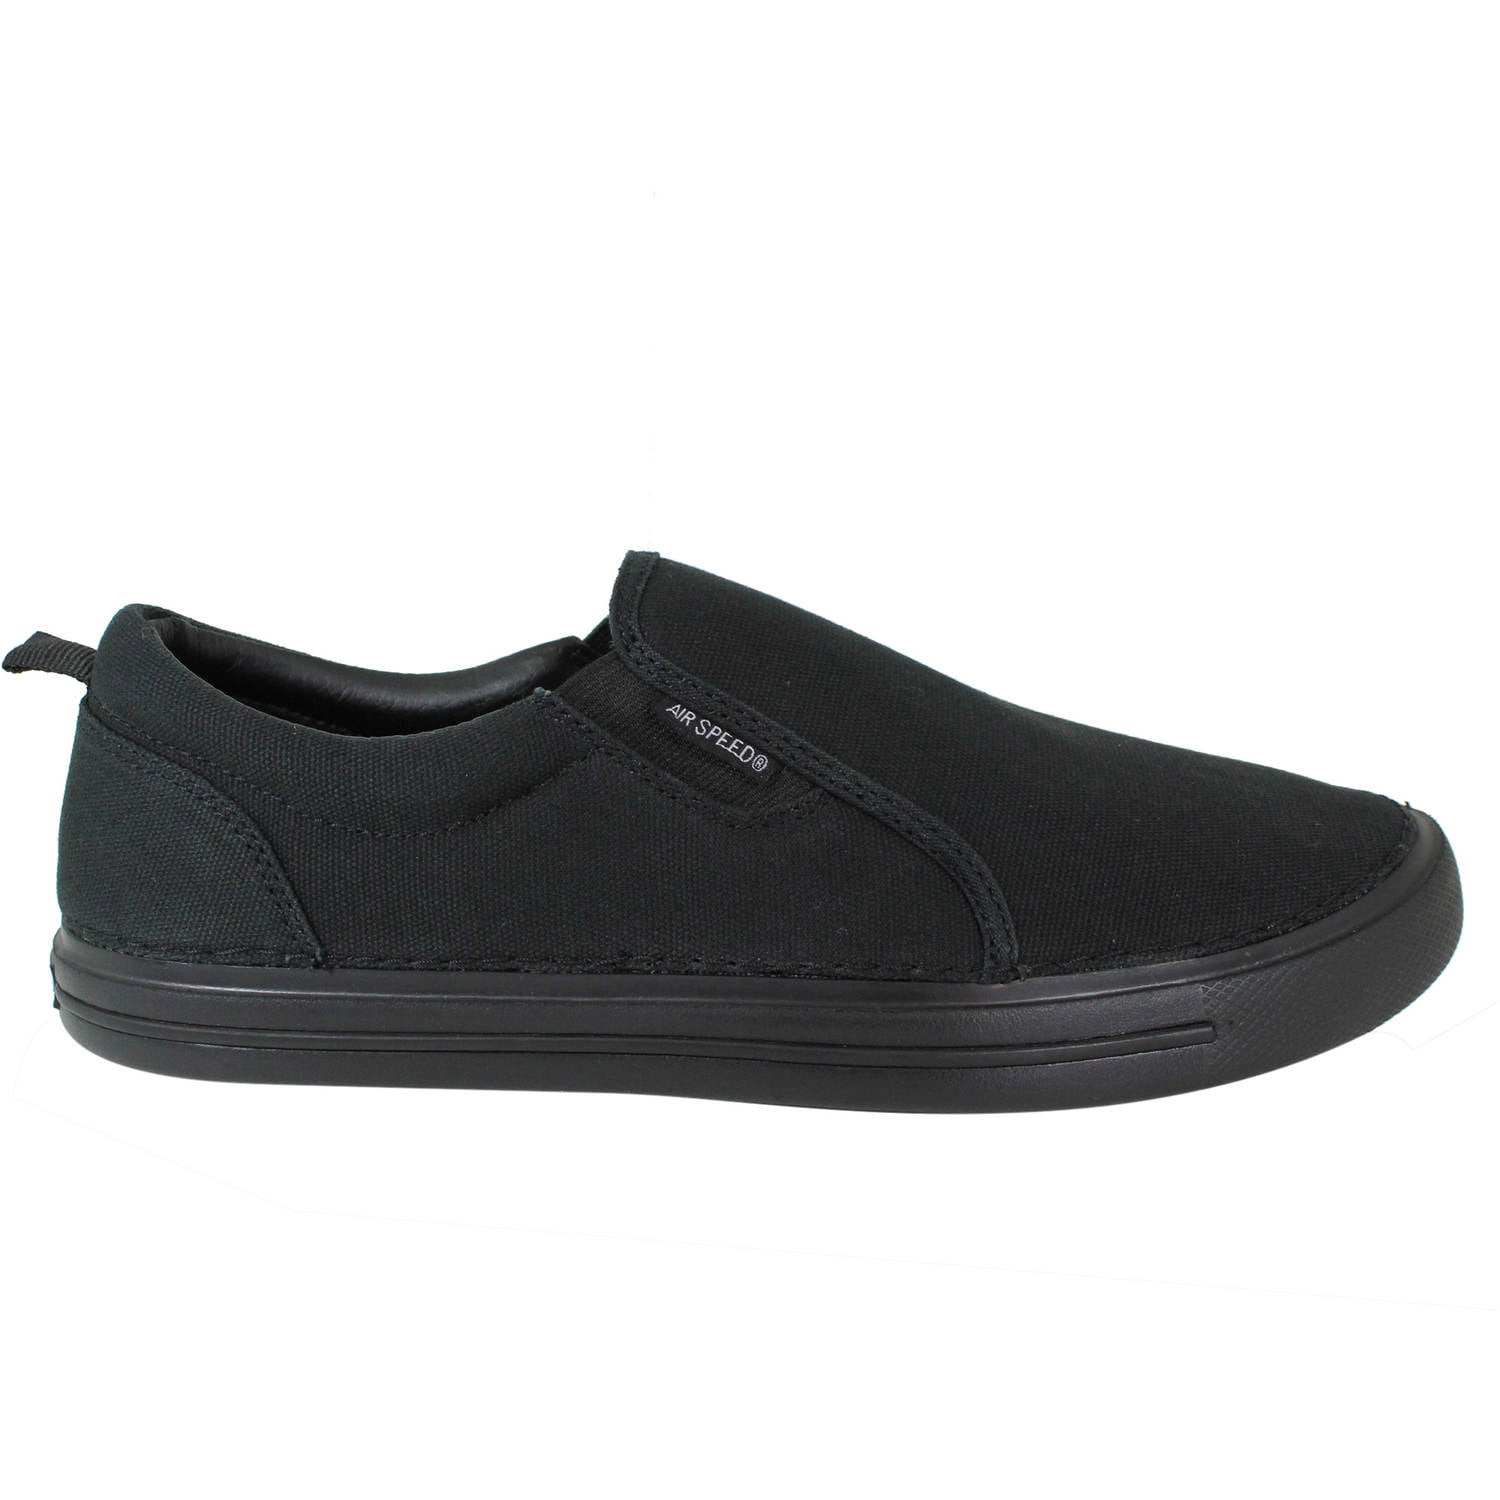 airspeed slip on canvas shoes